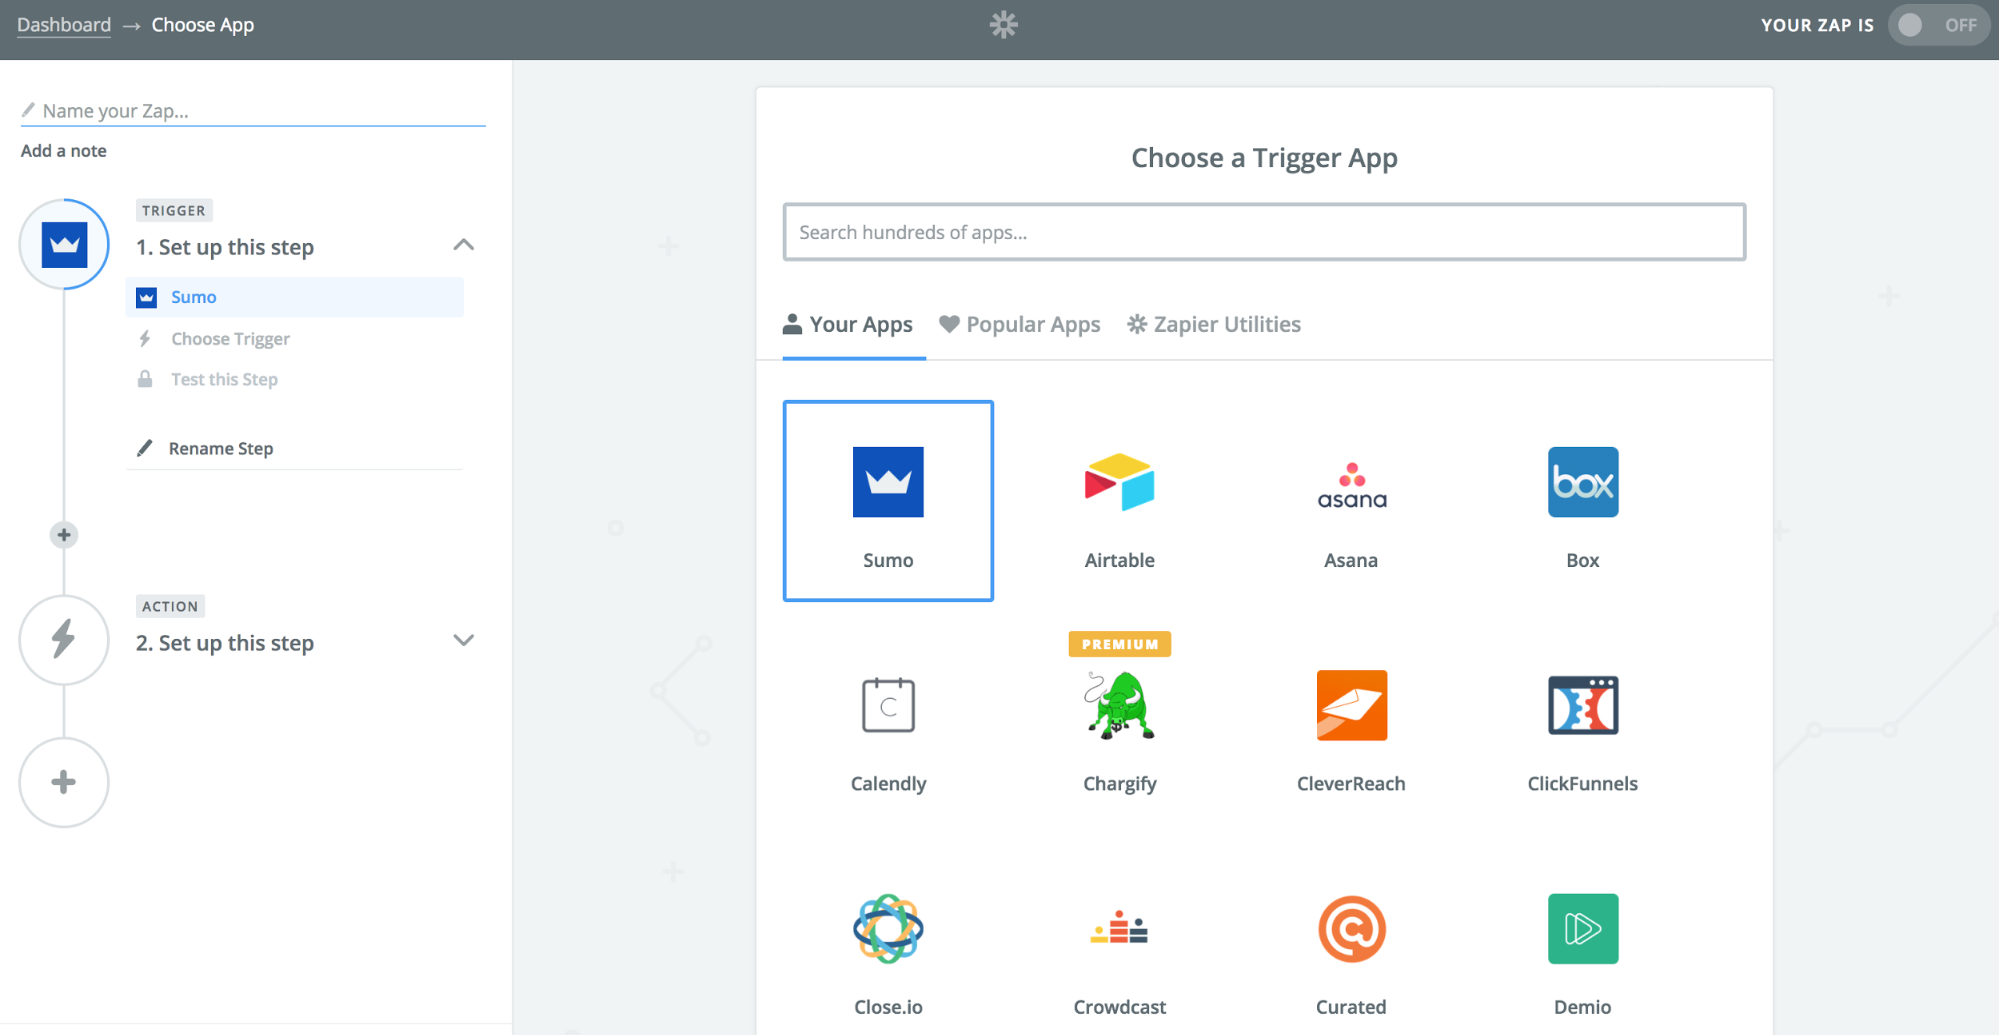 Screenshot showing trigger app selection page on Zapier